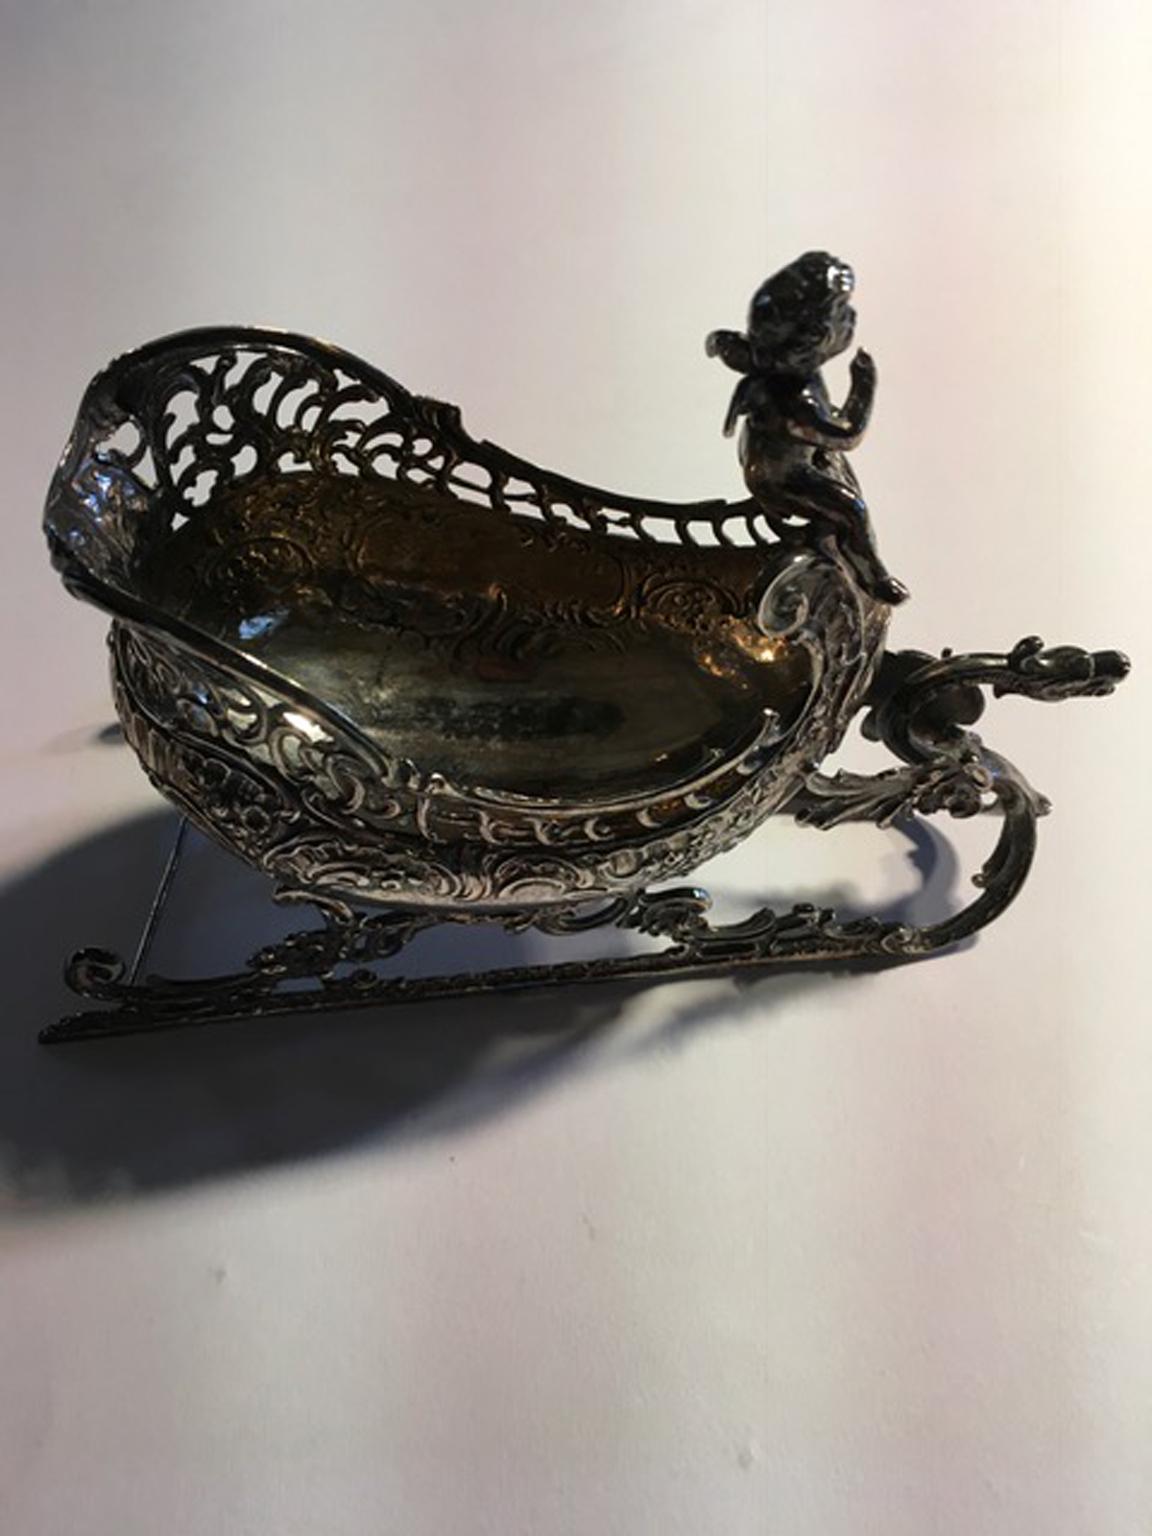 Hand-Crafted France 1750 Handcrafted Silver Sleed Bowl with Little Love in Victorian Style